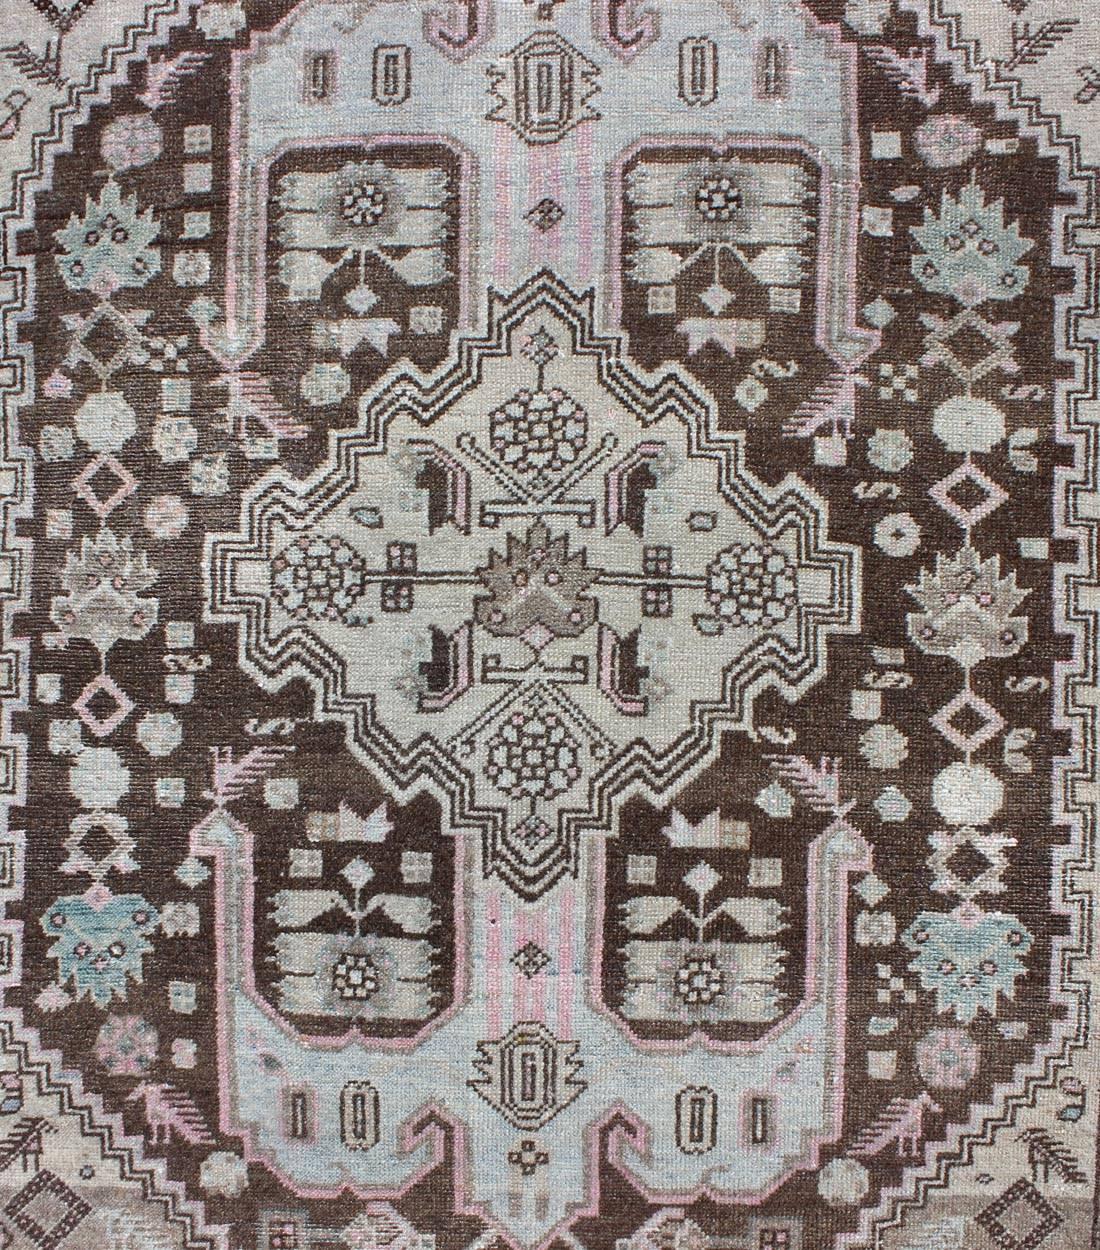 Antique Persian Hamedan Rug with Geometric Medallion in Blue, Pink, Chocolate In Good Condition For Sale In Atlanta, GA